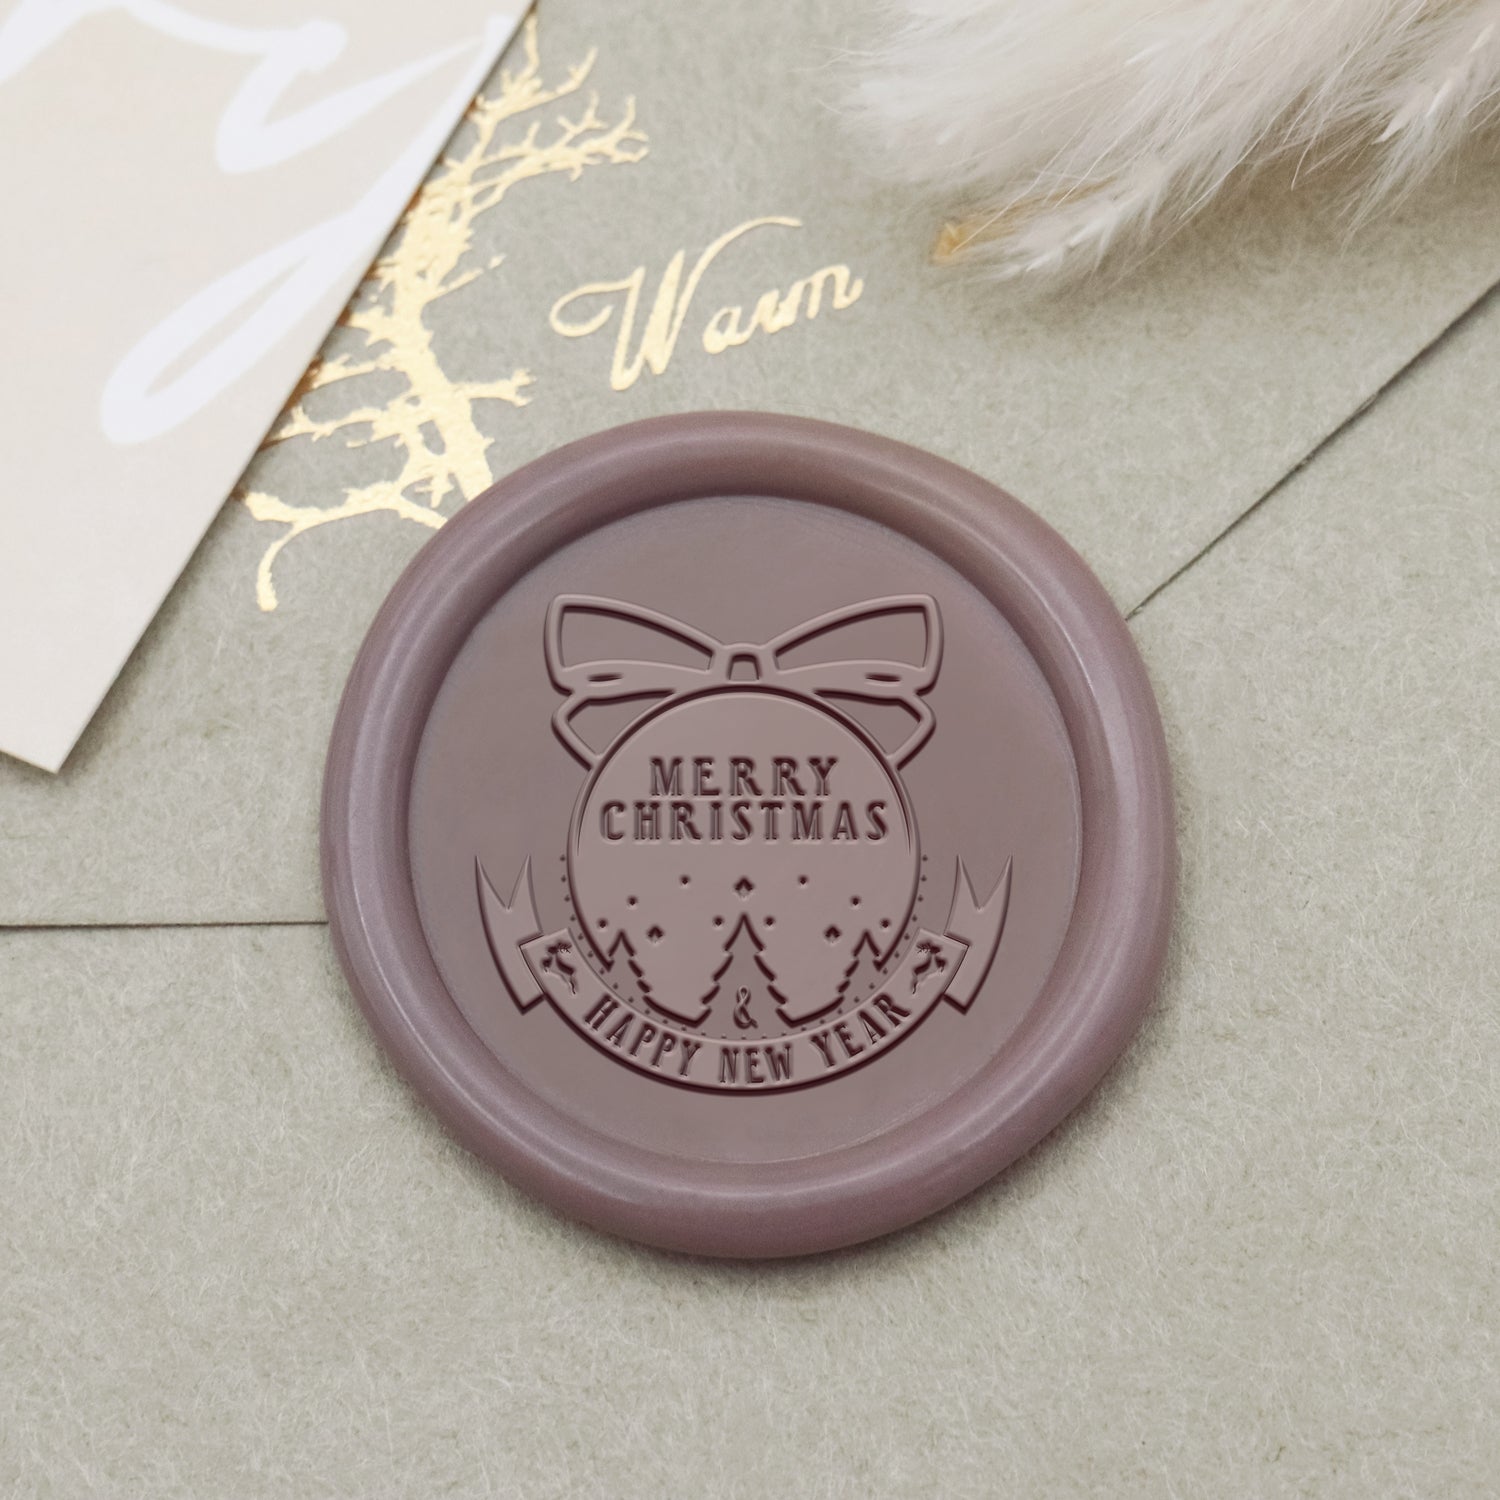 Happy New Year Wax Seal Stamp - Style 16 1